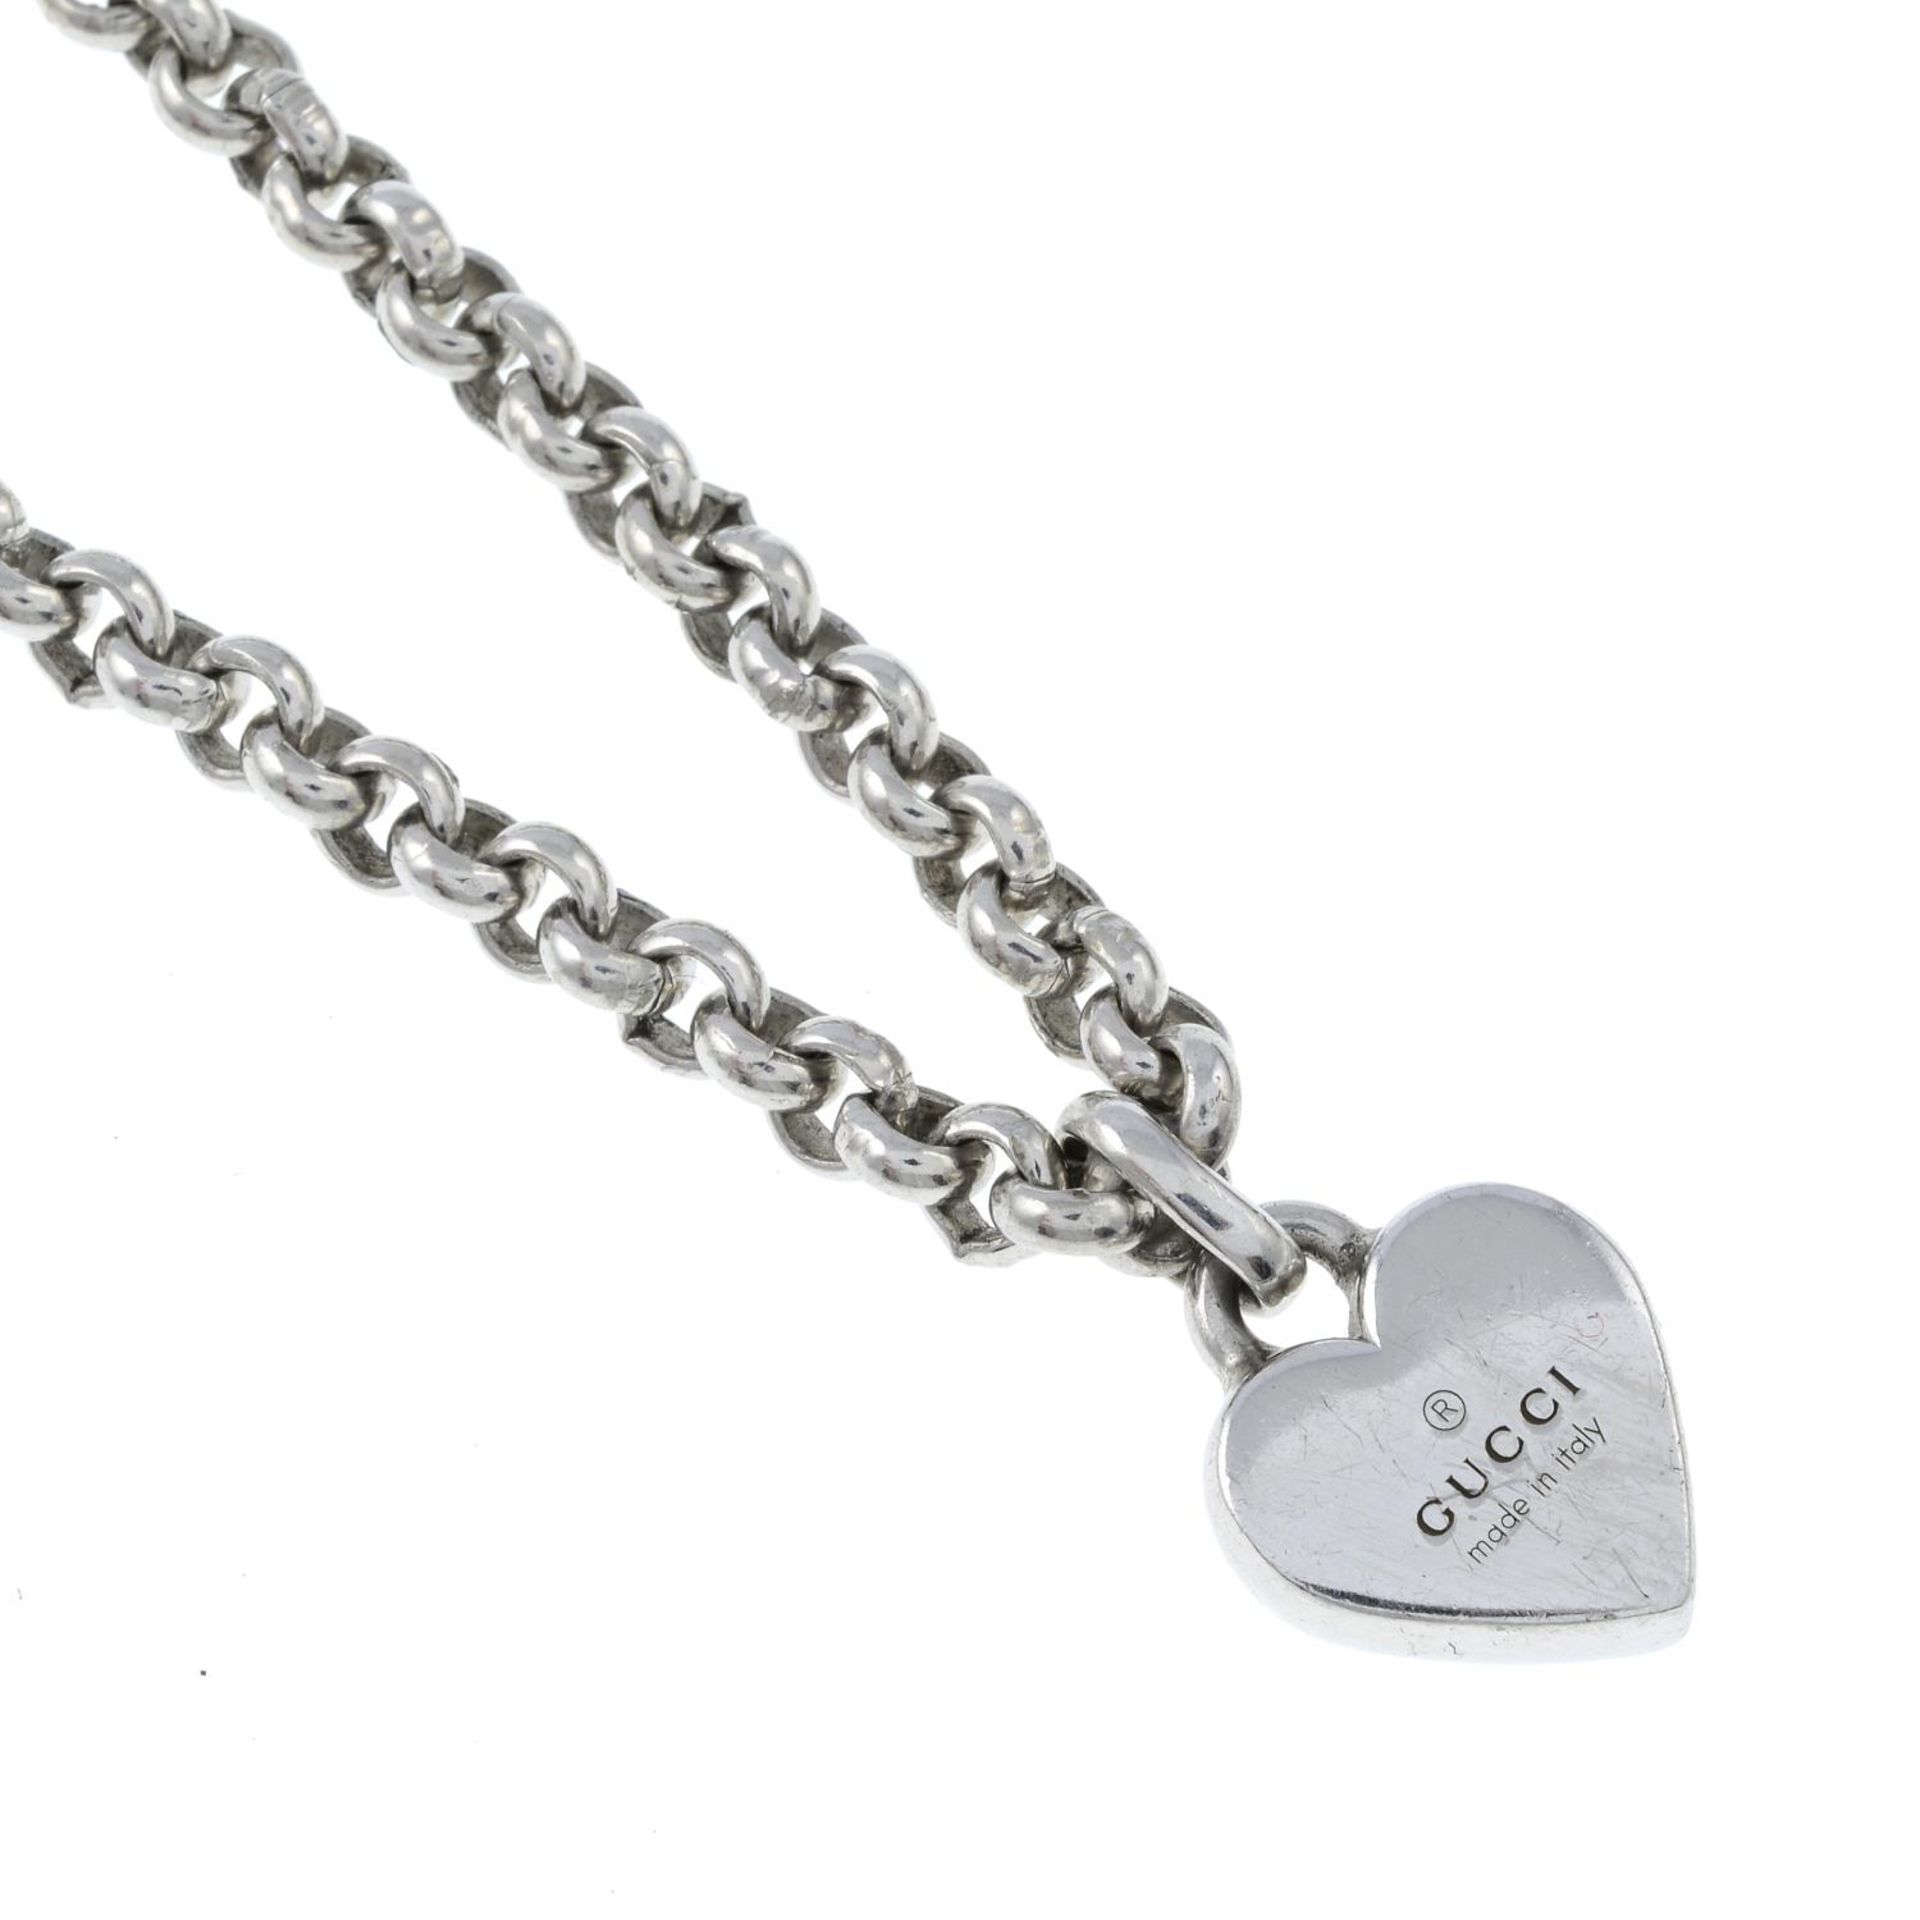 A silver 'Trademark' heart pendant with chain, by Gucci.Signed Gucci.Stamped 925.